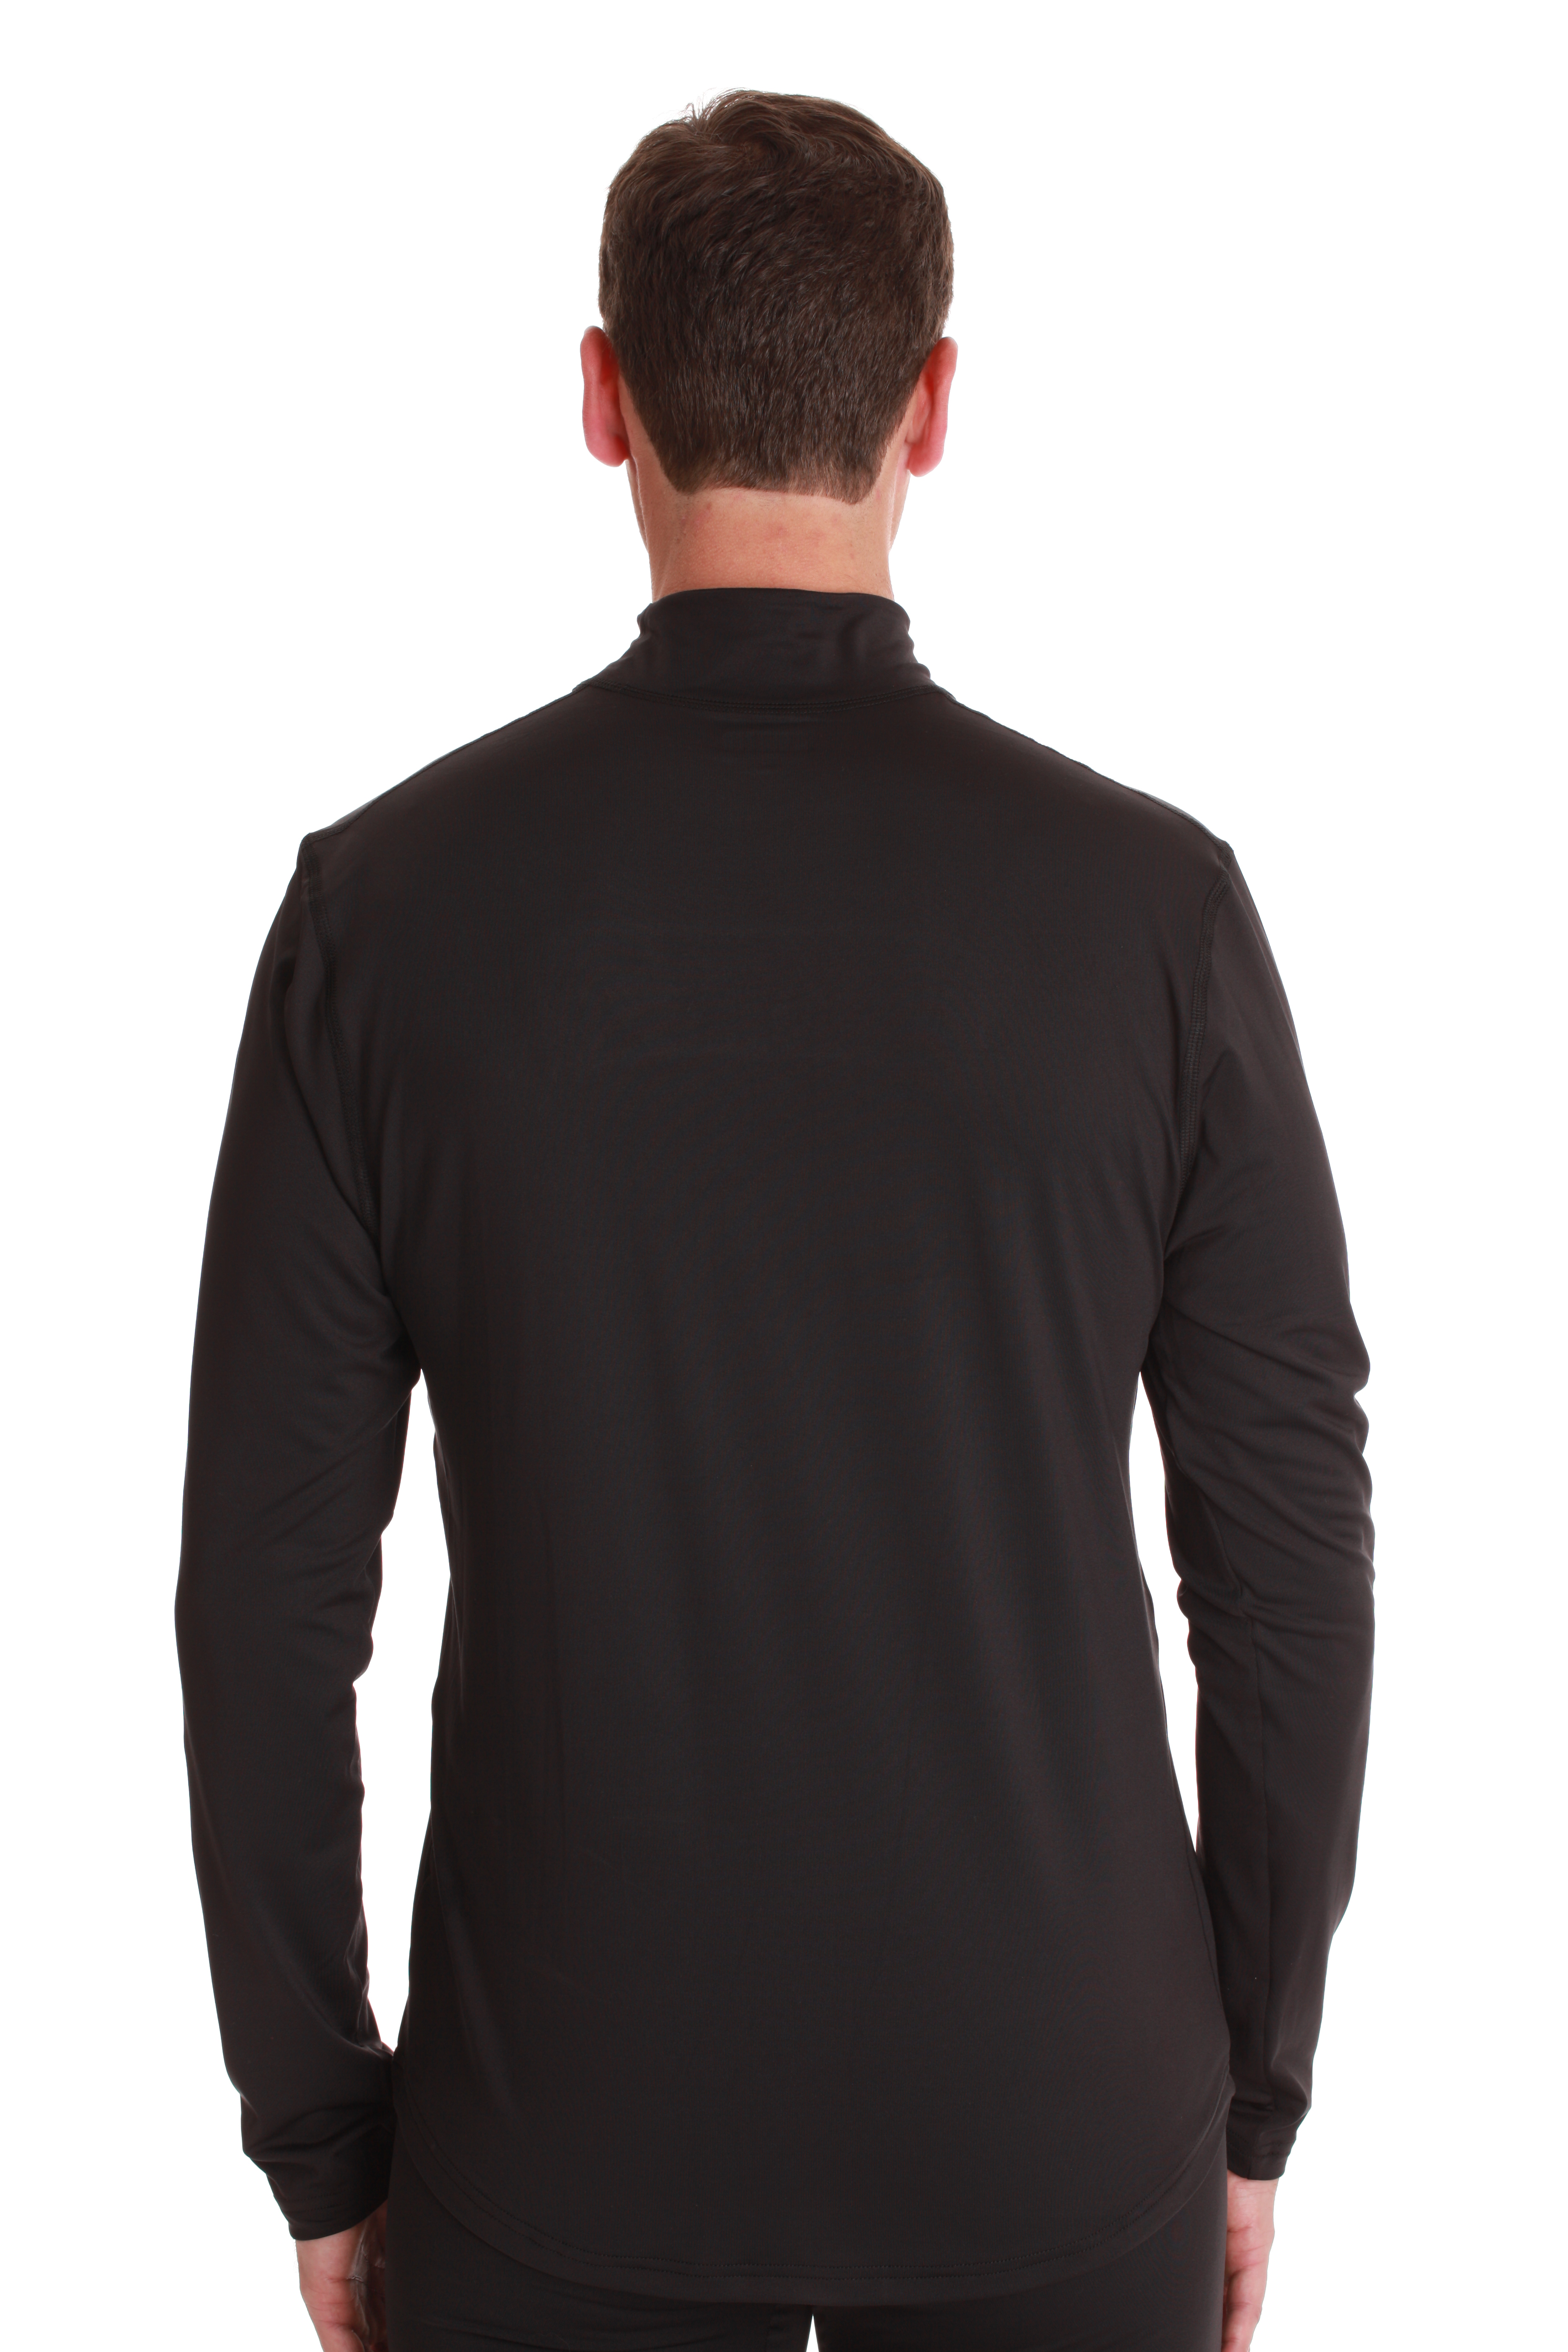 Download At The Buzzer Mens Long Sleeve Thermal Shirt Compression ...